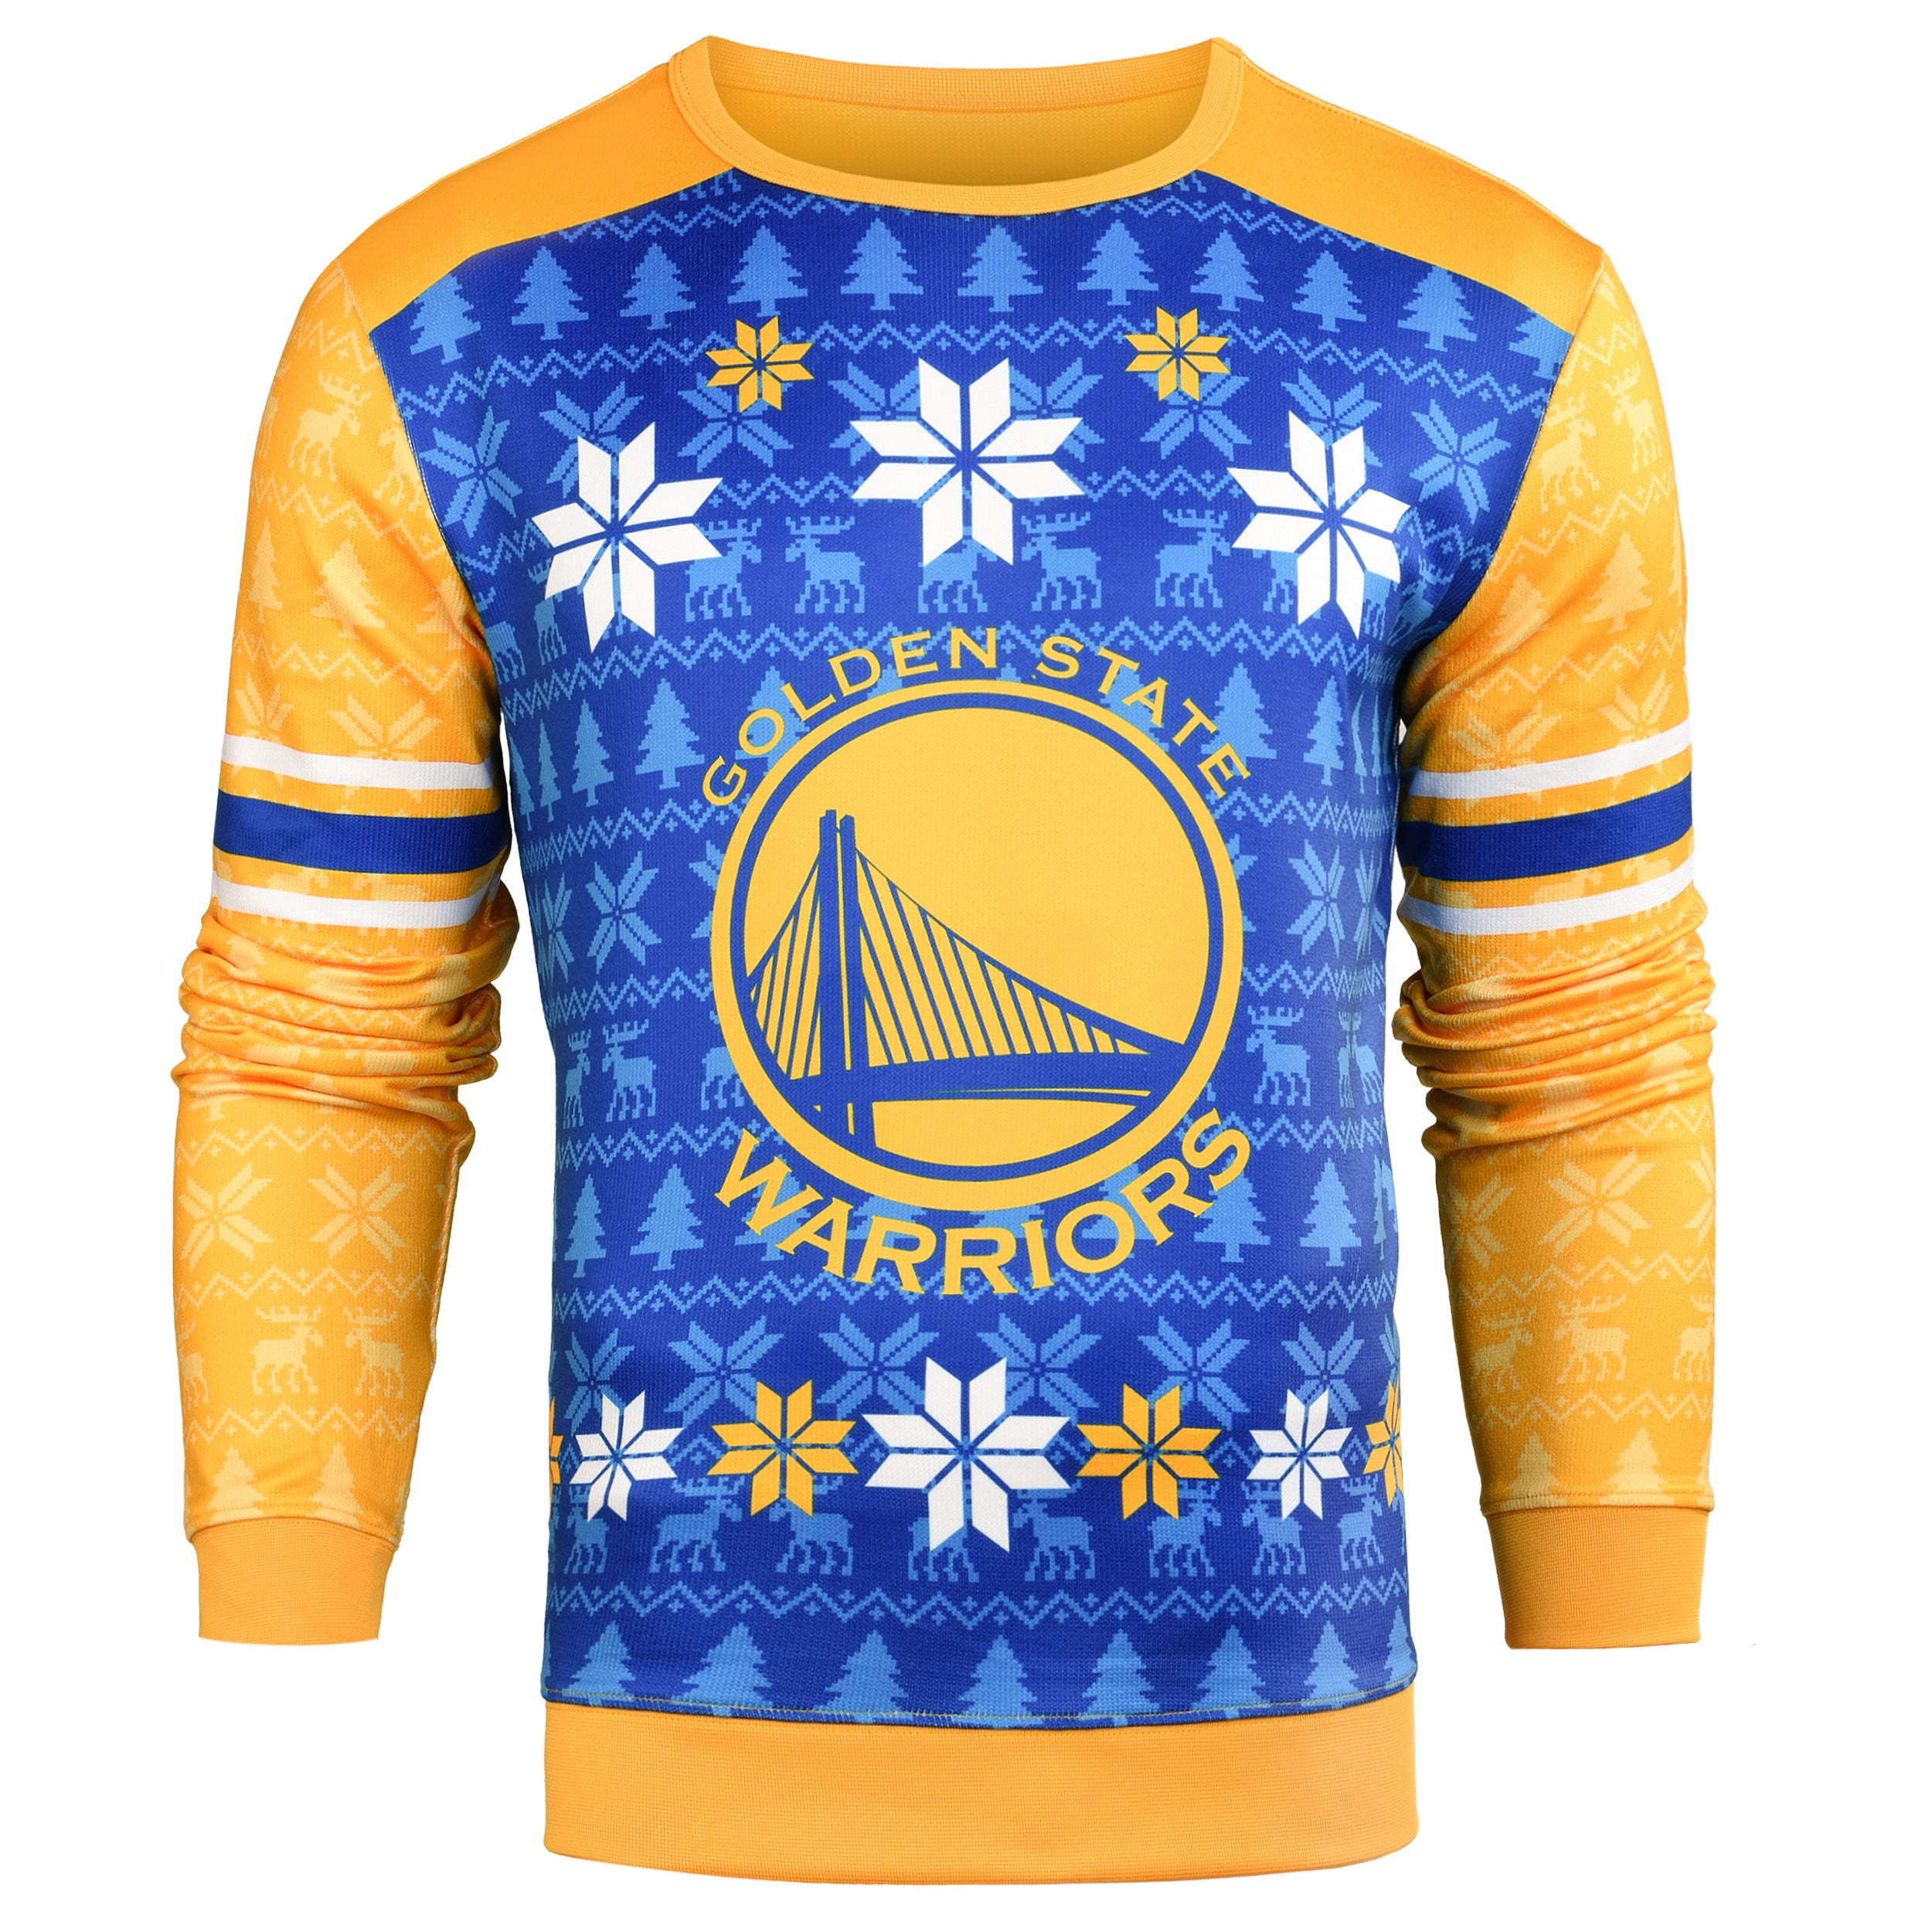 Golden State Warriors Mens Shirts, Sweaters, Warriors Ugly